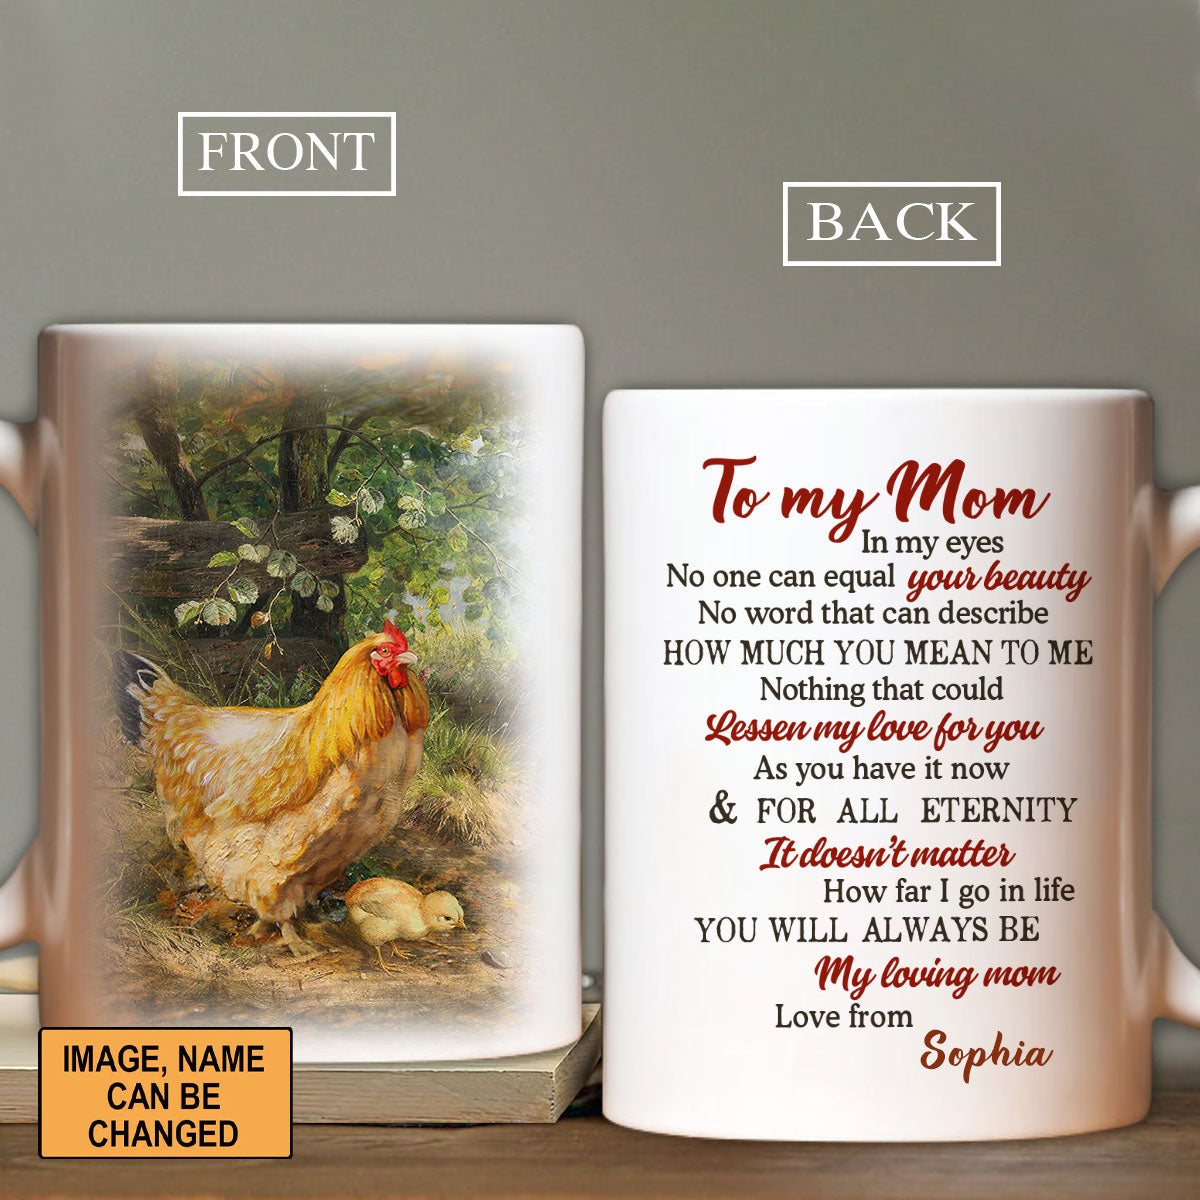 Personalized Watercolor Mom Blessed With Boys Mug, Mom of Sons